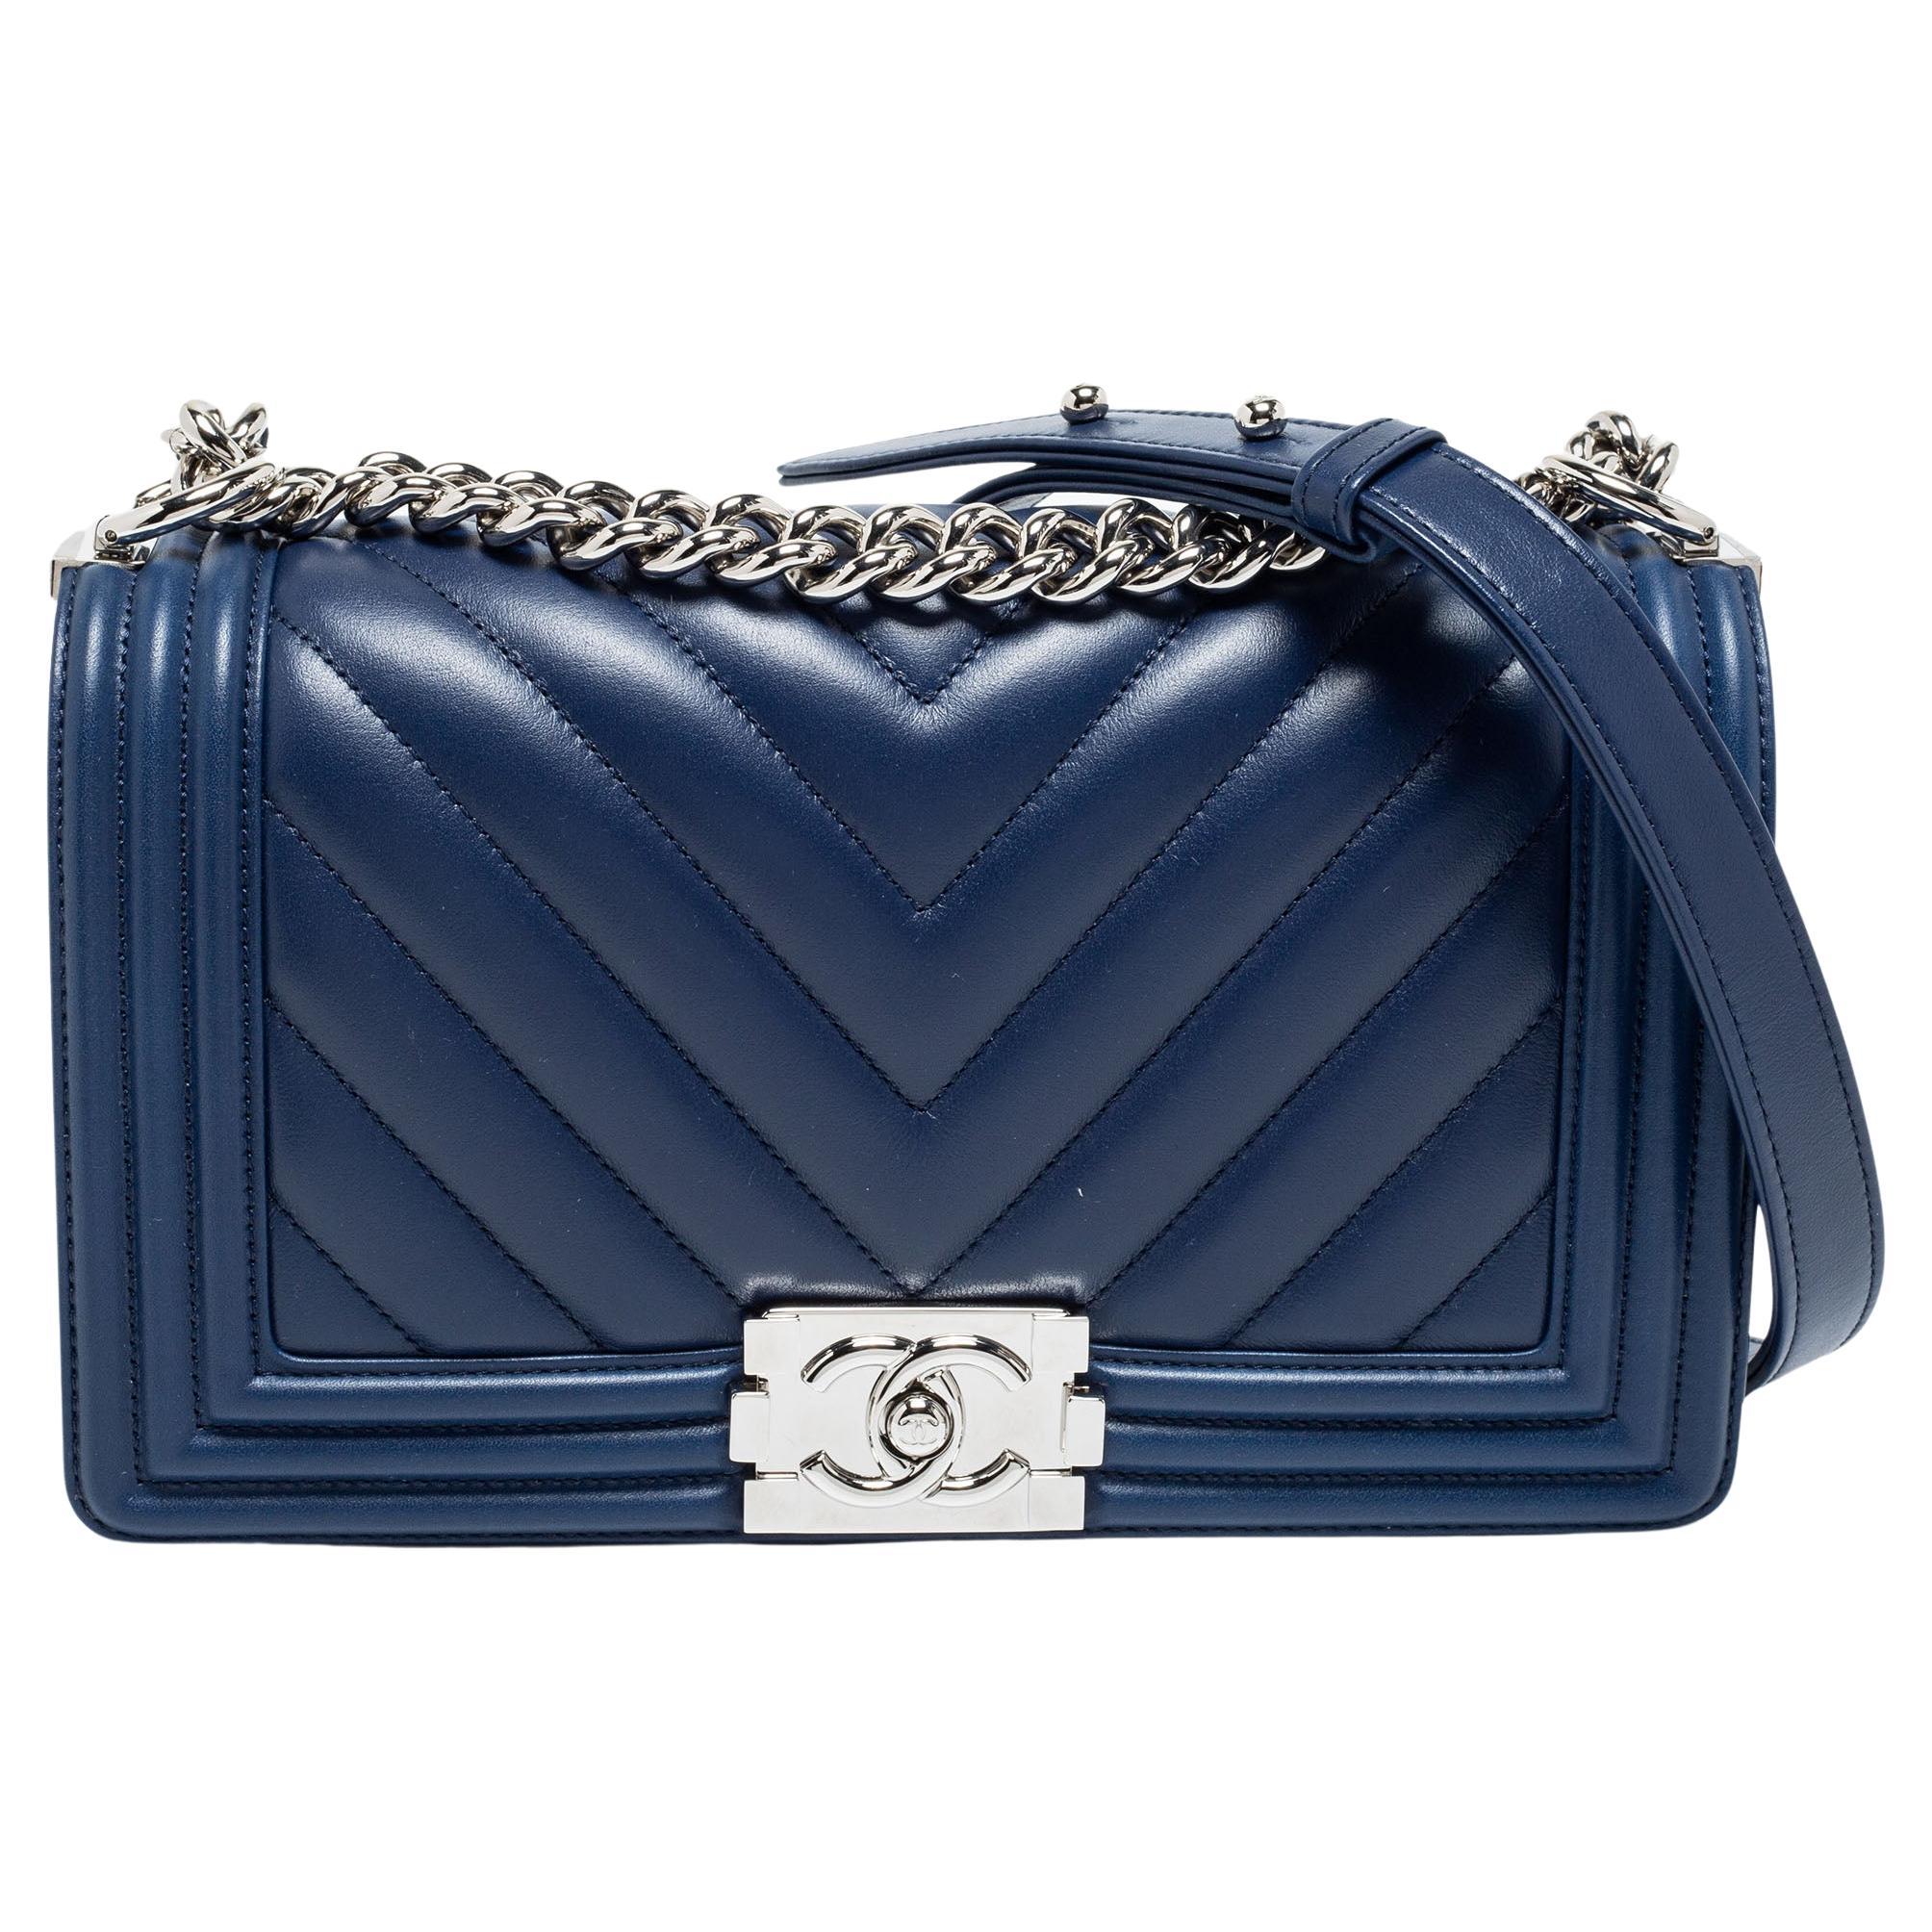 Chanel Around the World Classic Flap Bag  Classic flap bag, Classic flap,  Flap bag